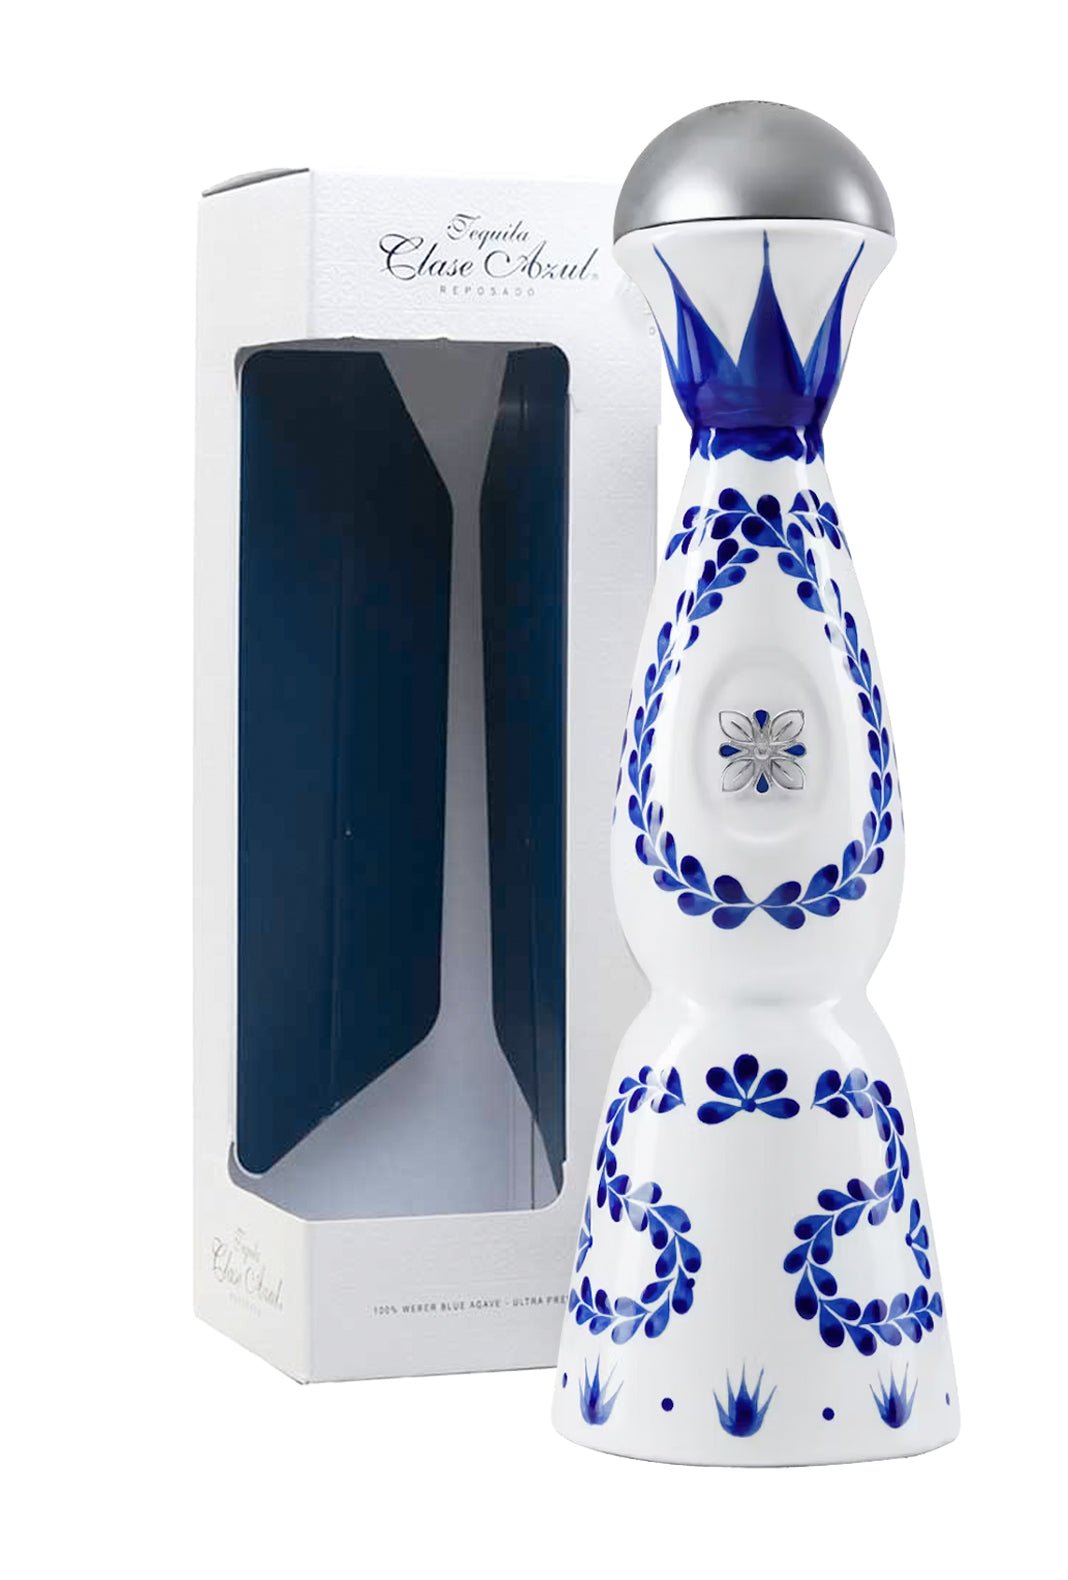 Clase Azul Tequila Reposado 40% 1.75L | Tequila | Shop online at Spirits of France